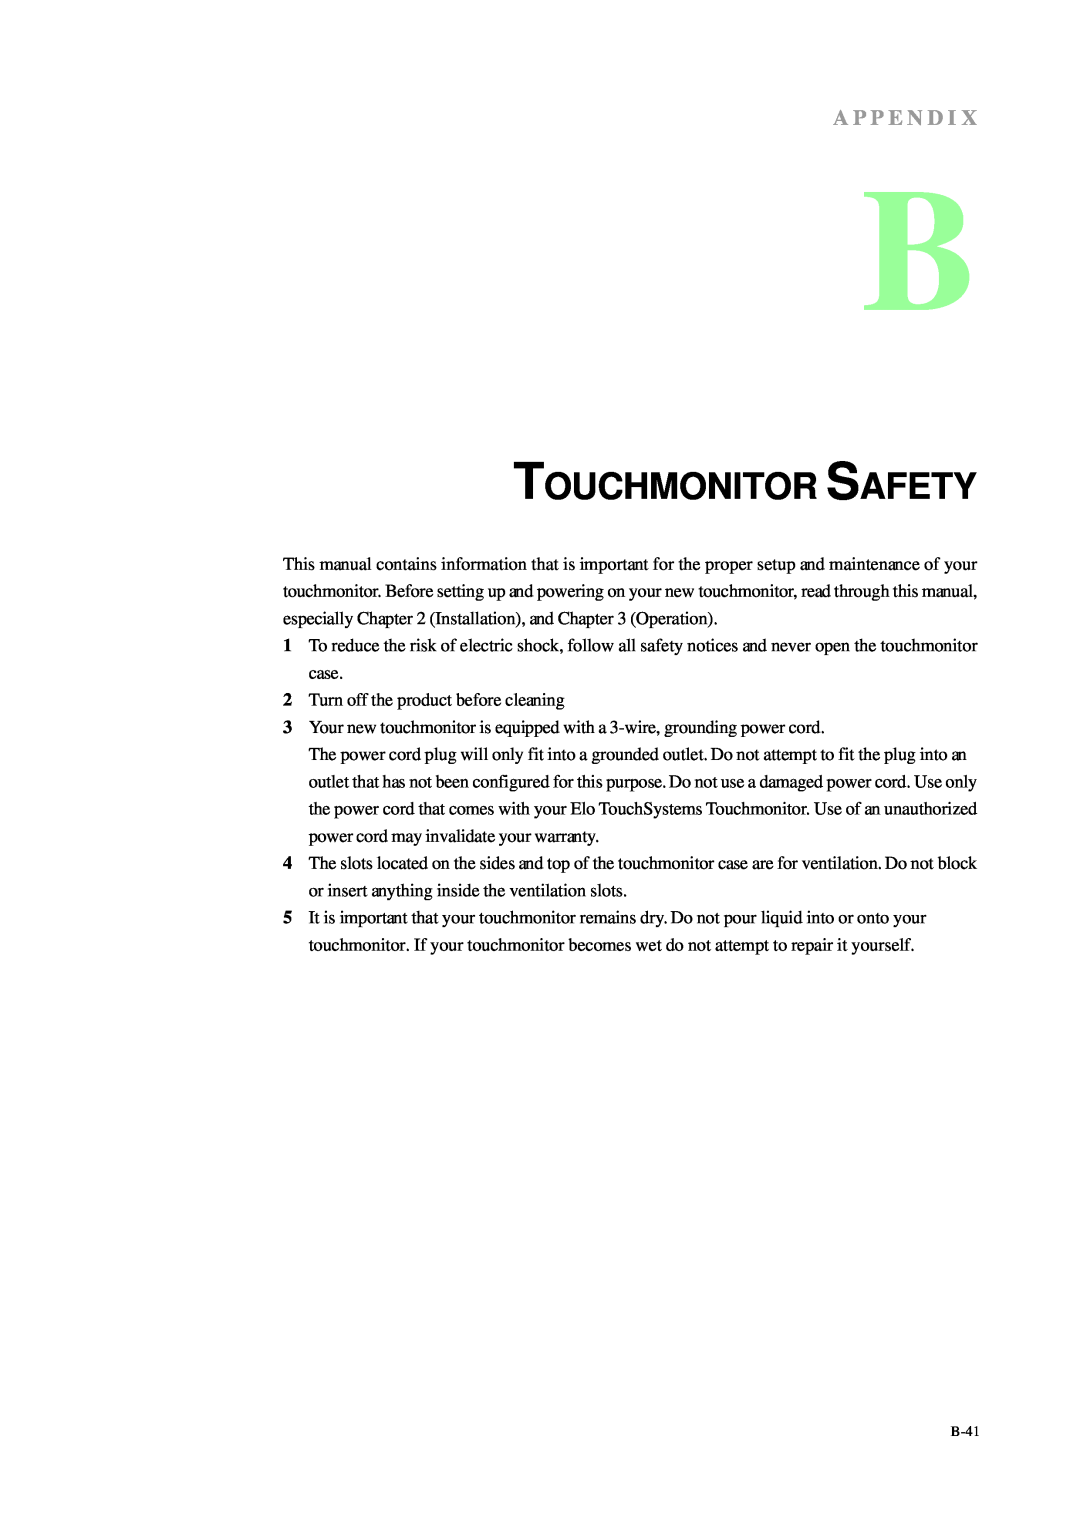 Tyco Electronics 1229L manual Touchmonitor Safety, A P P E N D I 